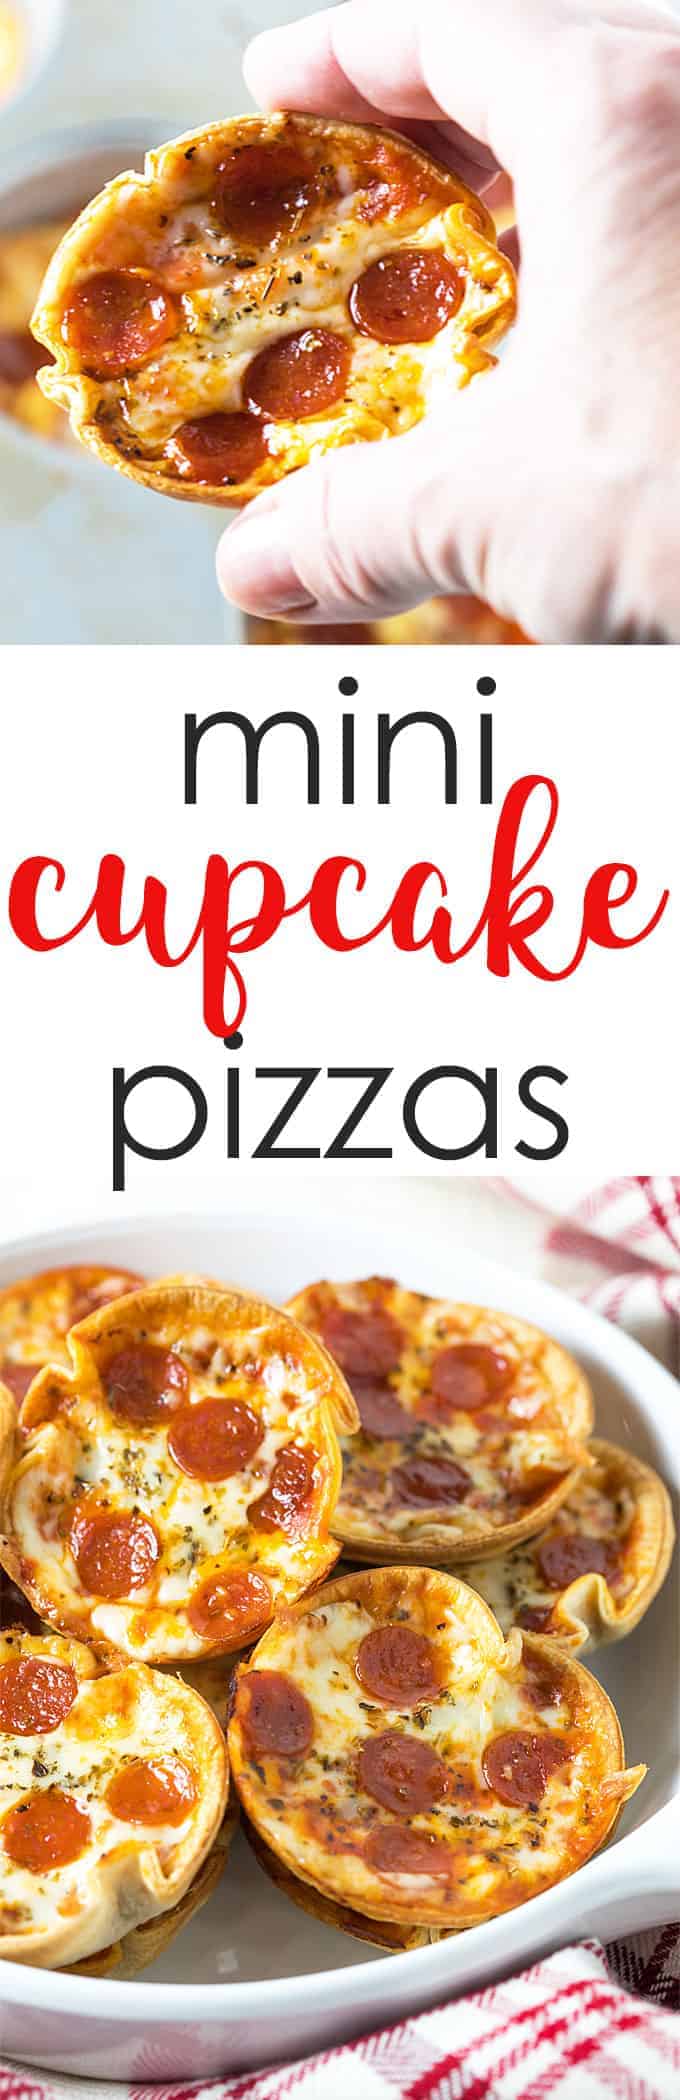 A two image vertical collage of mini cupcake pizzas with overlay text in the center.